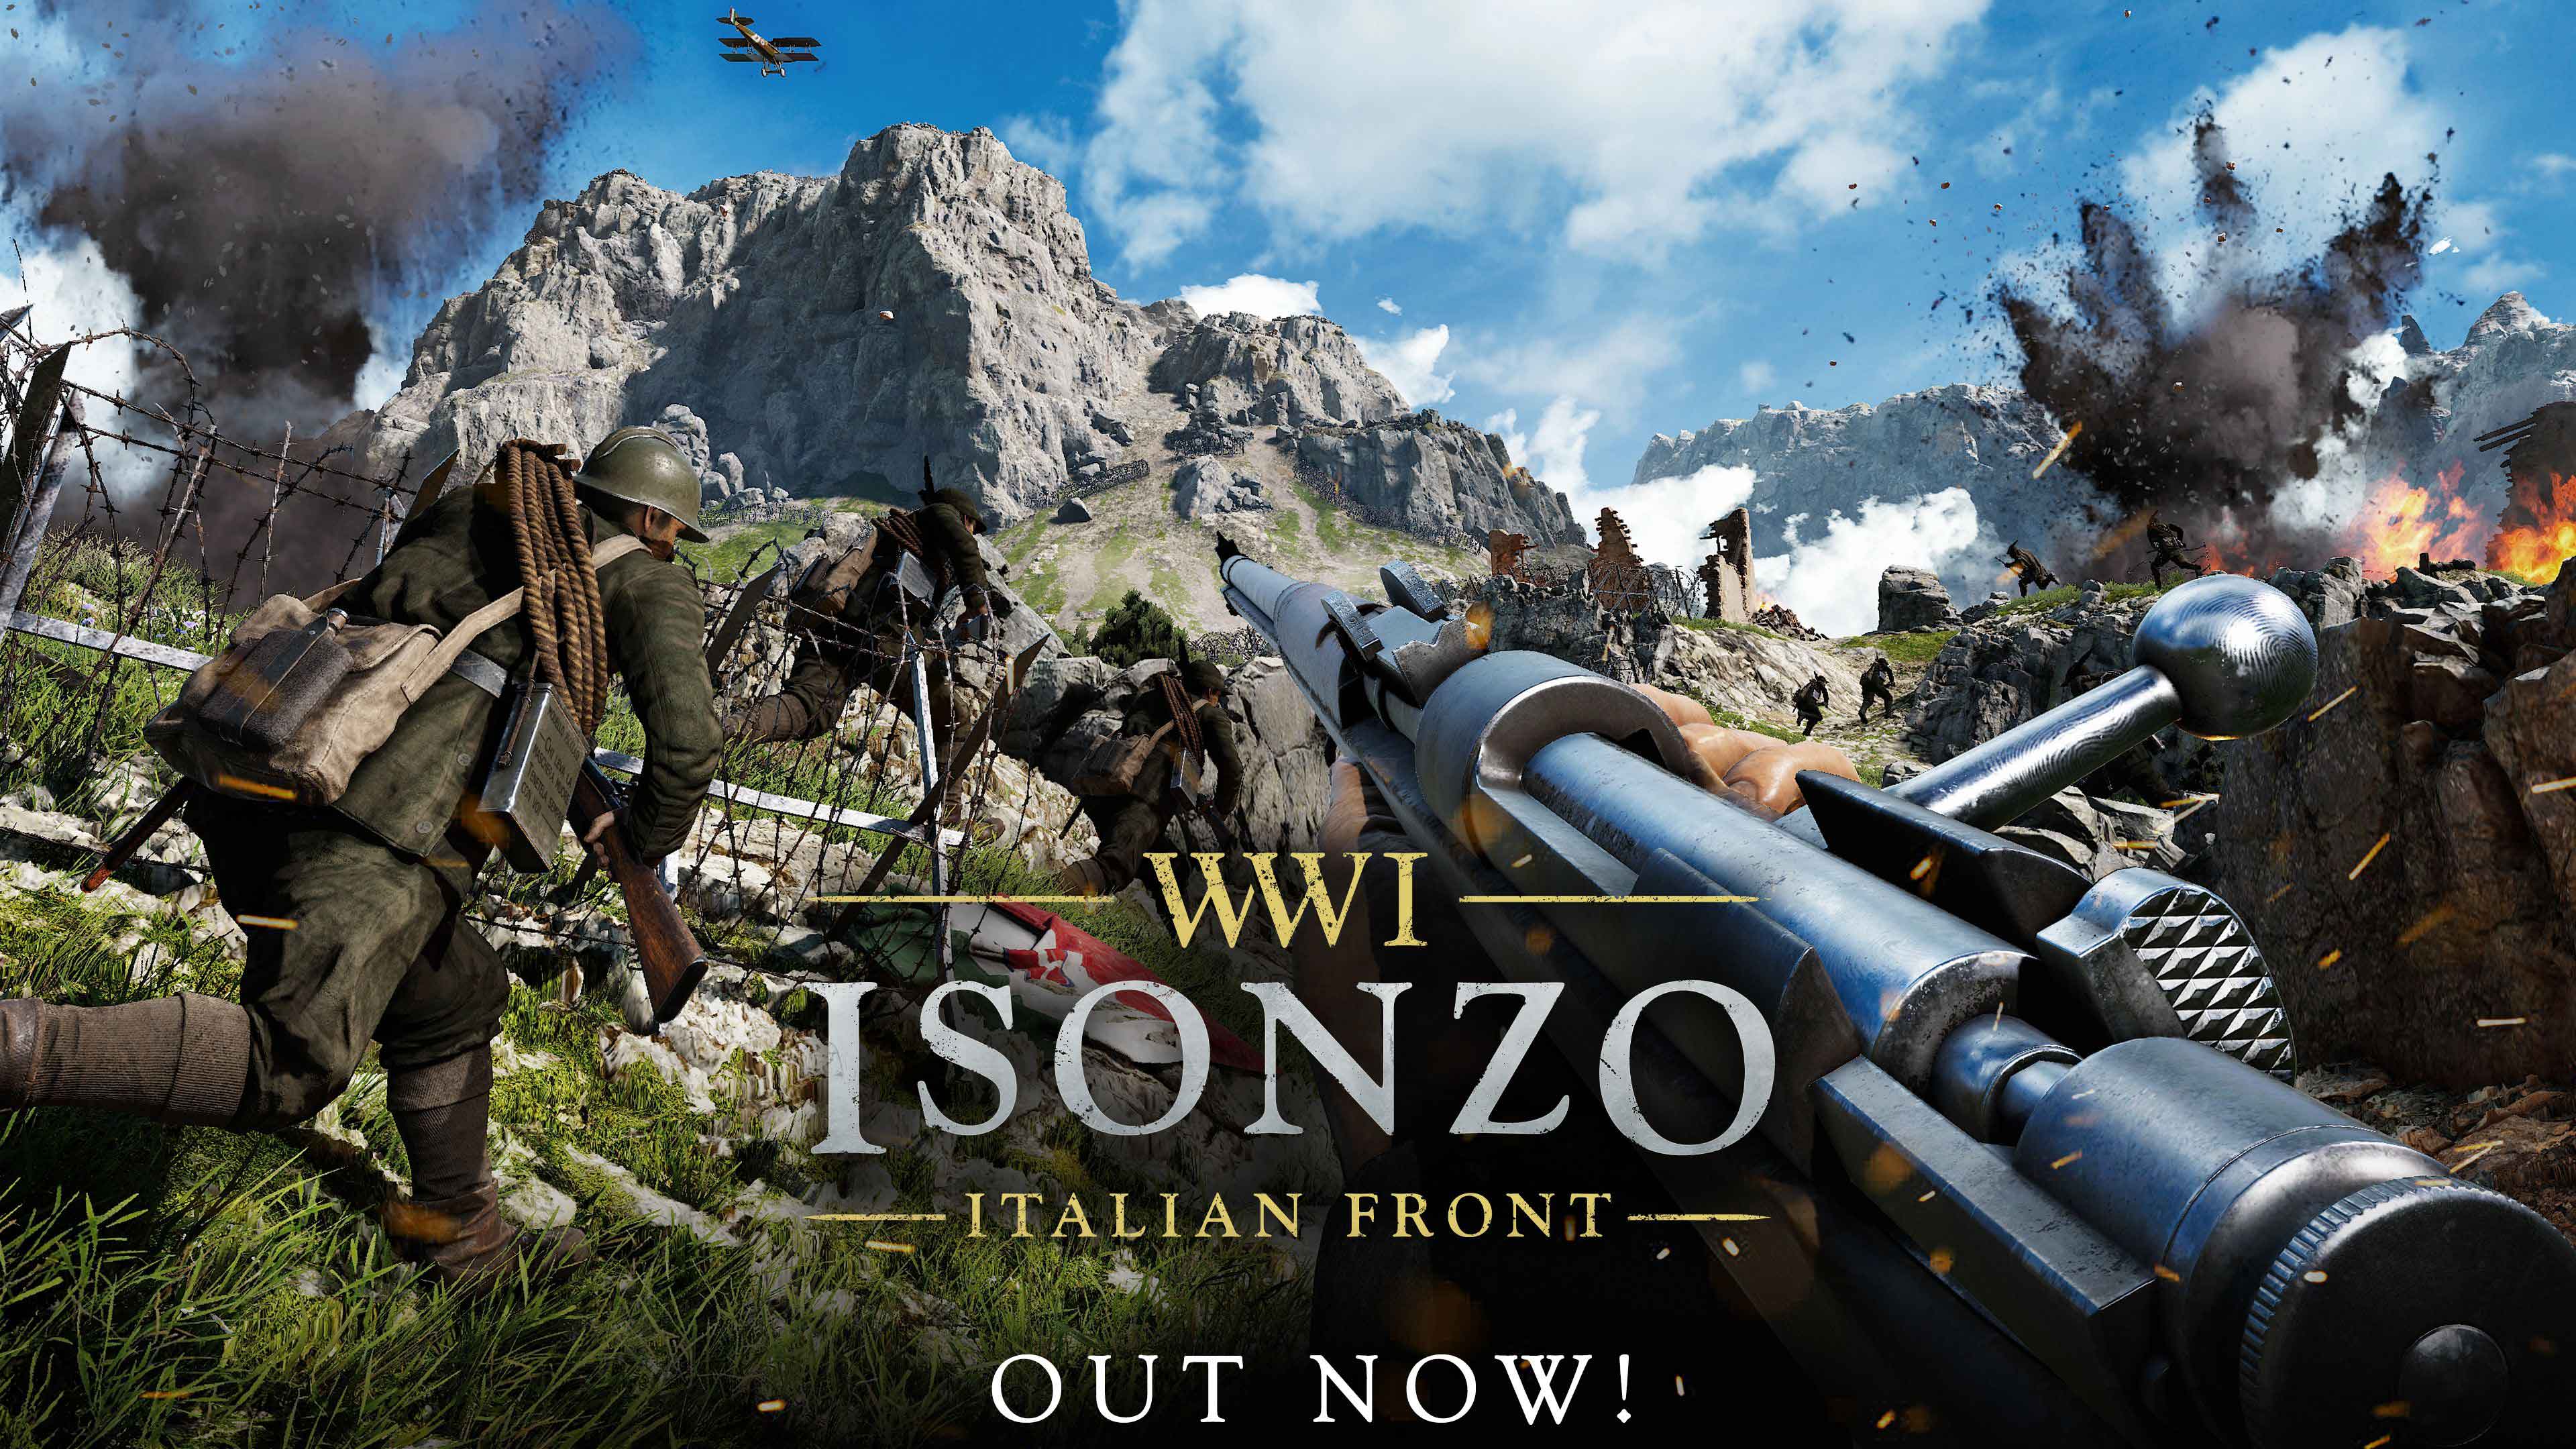 Video For World War I First-Person Shooter Isonzo is Available Now